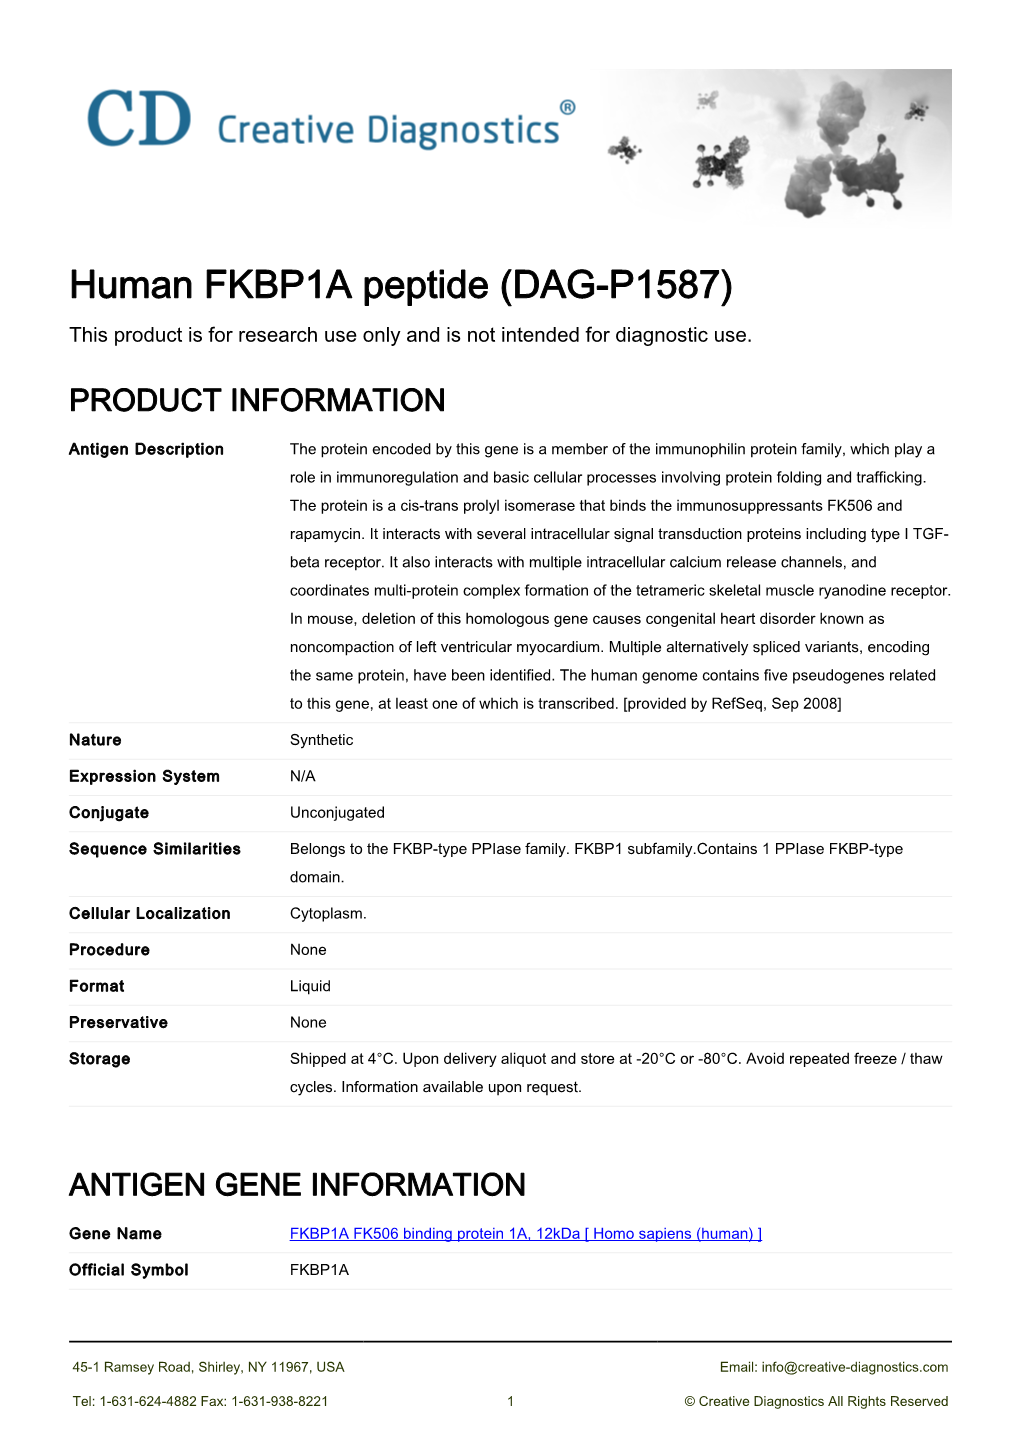 Human FKBP1A Peptide (DAG-P1587) This Product Is for Research Use Only and Is Not Intended for Diagnostic Use